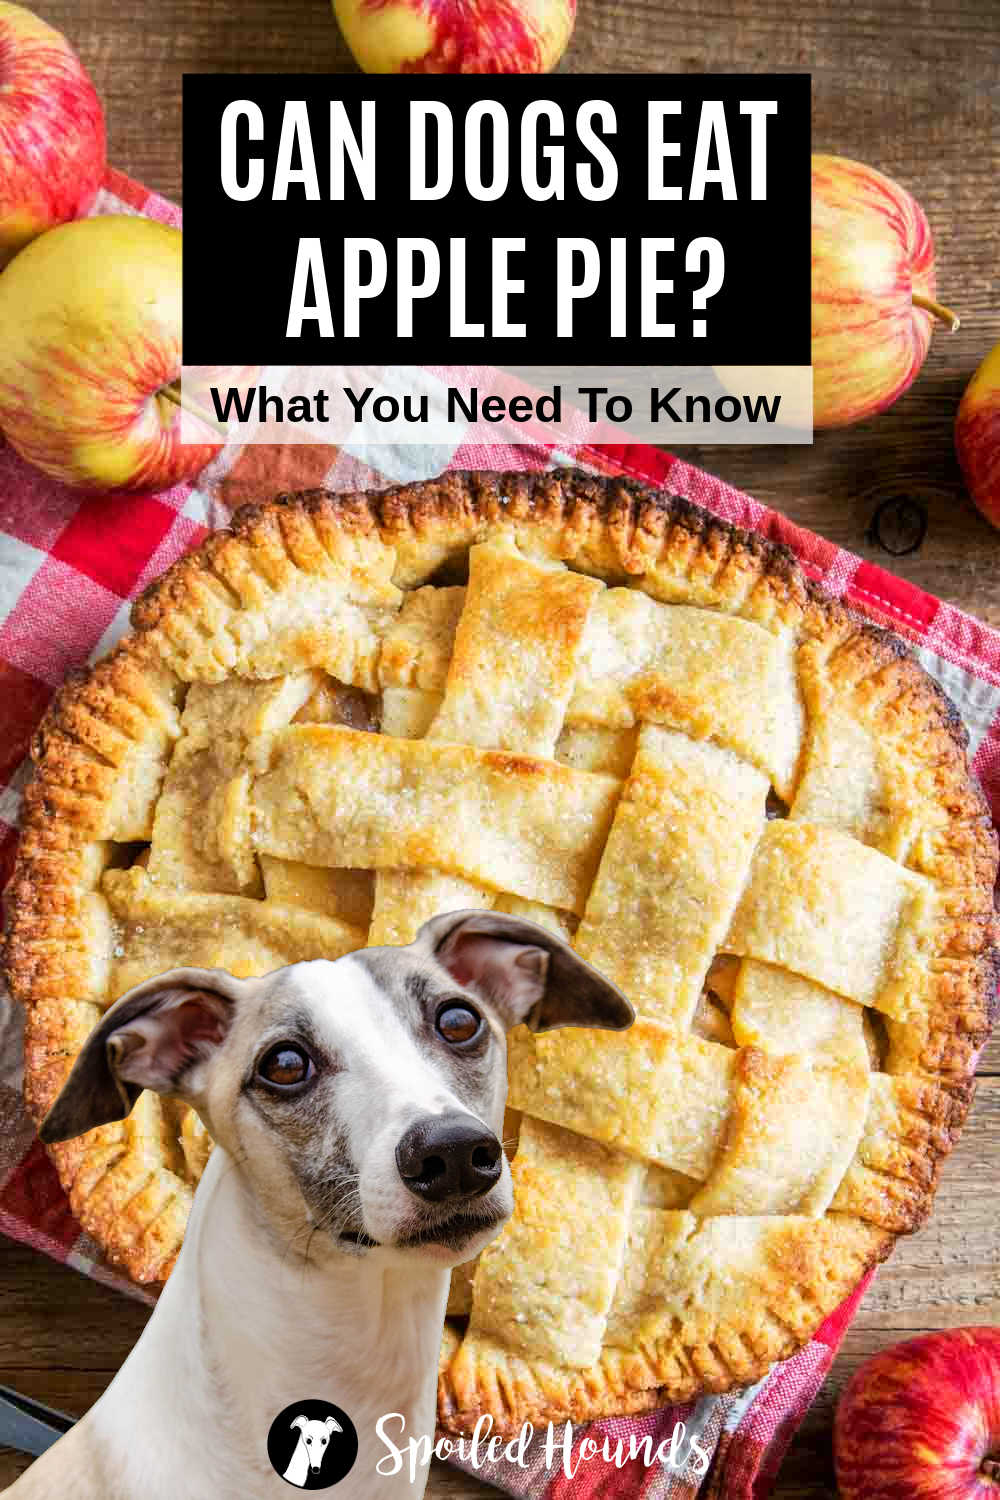 Whippet dog in front of an apple pie.